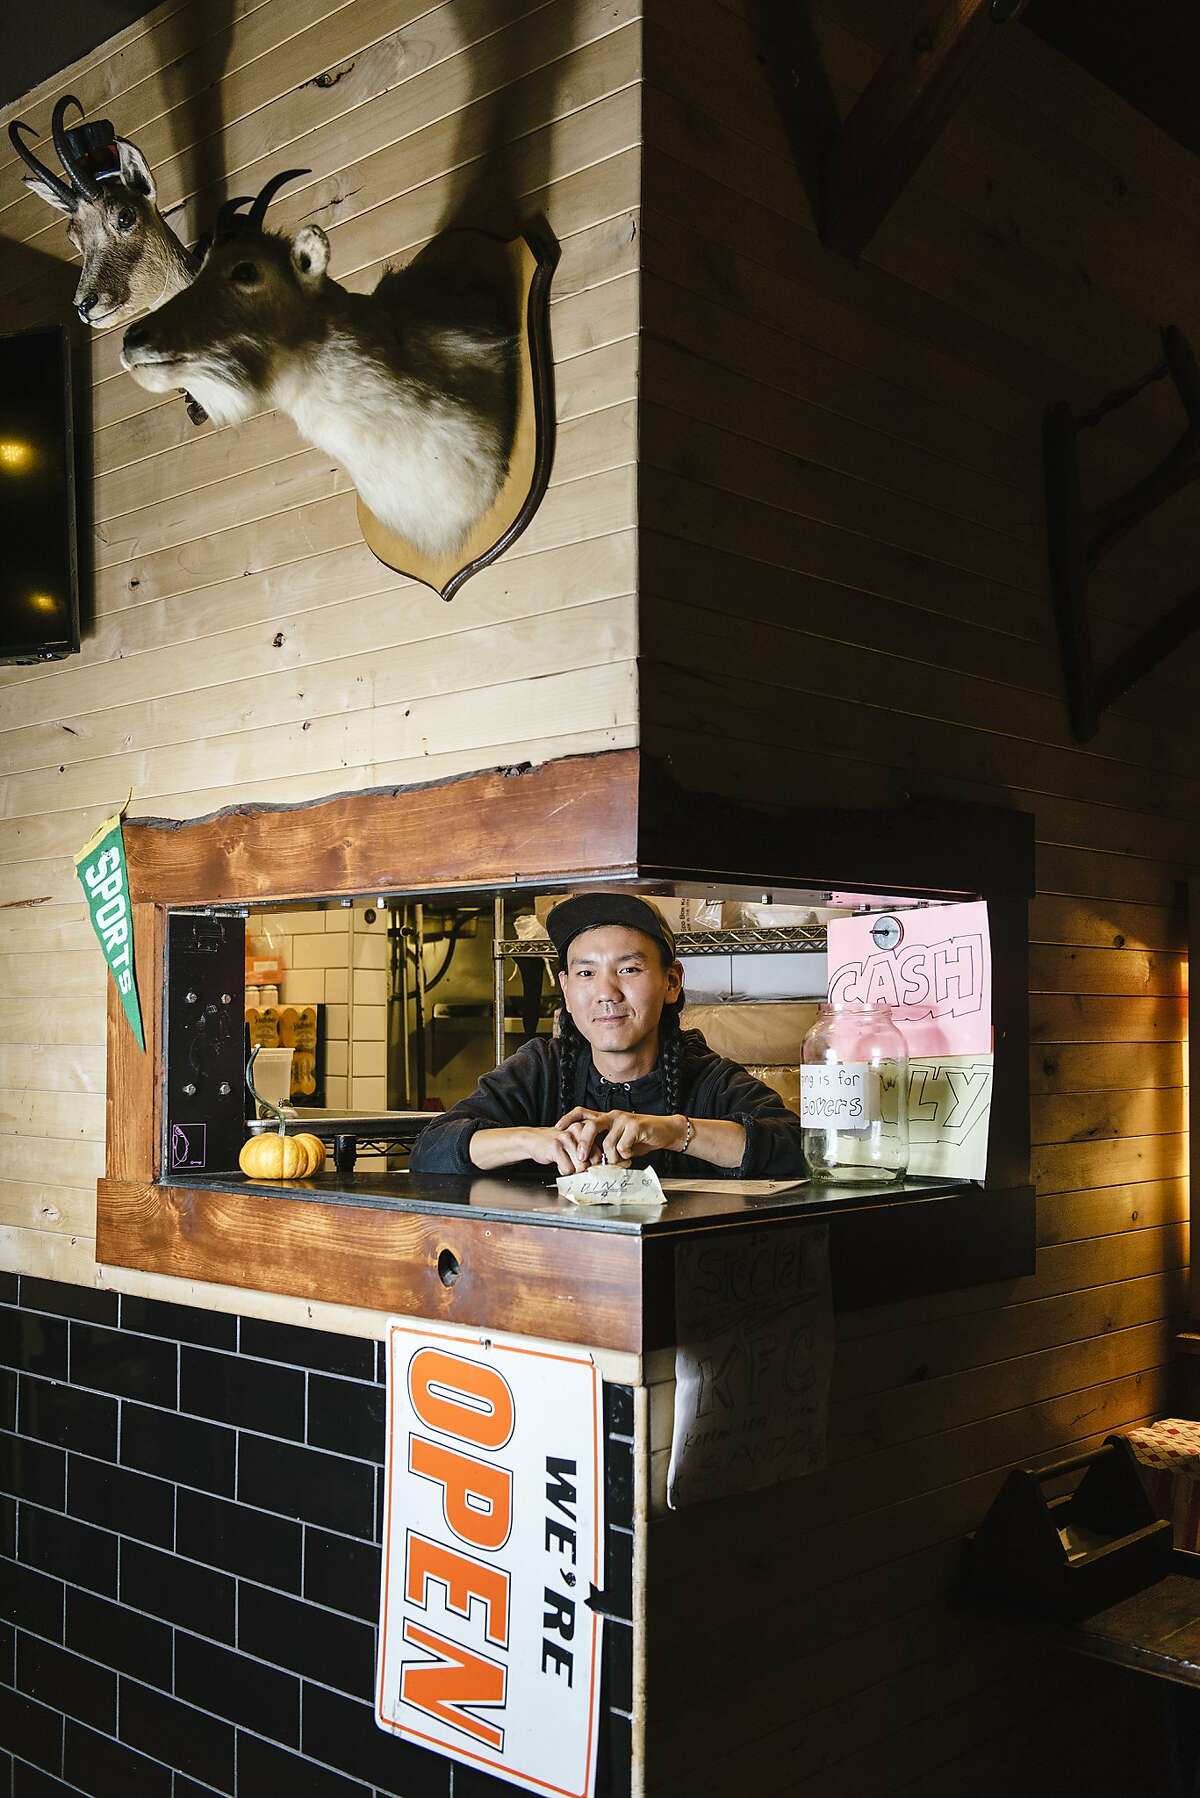 Chef Mike Yoon looks out of the delivery window of his pop-up diner Lovely's, serving Americana food, inside The Lodge bar in Oakland, California, on Wednesday, November 21, 2018.